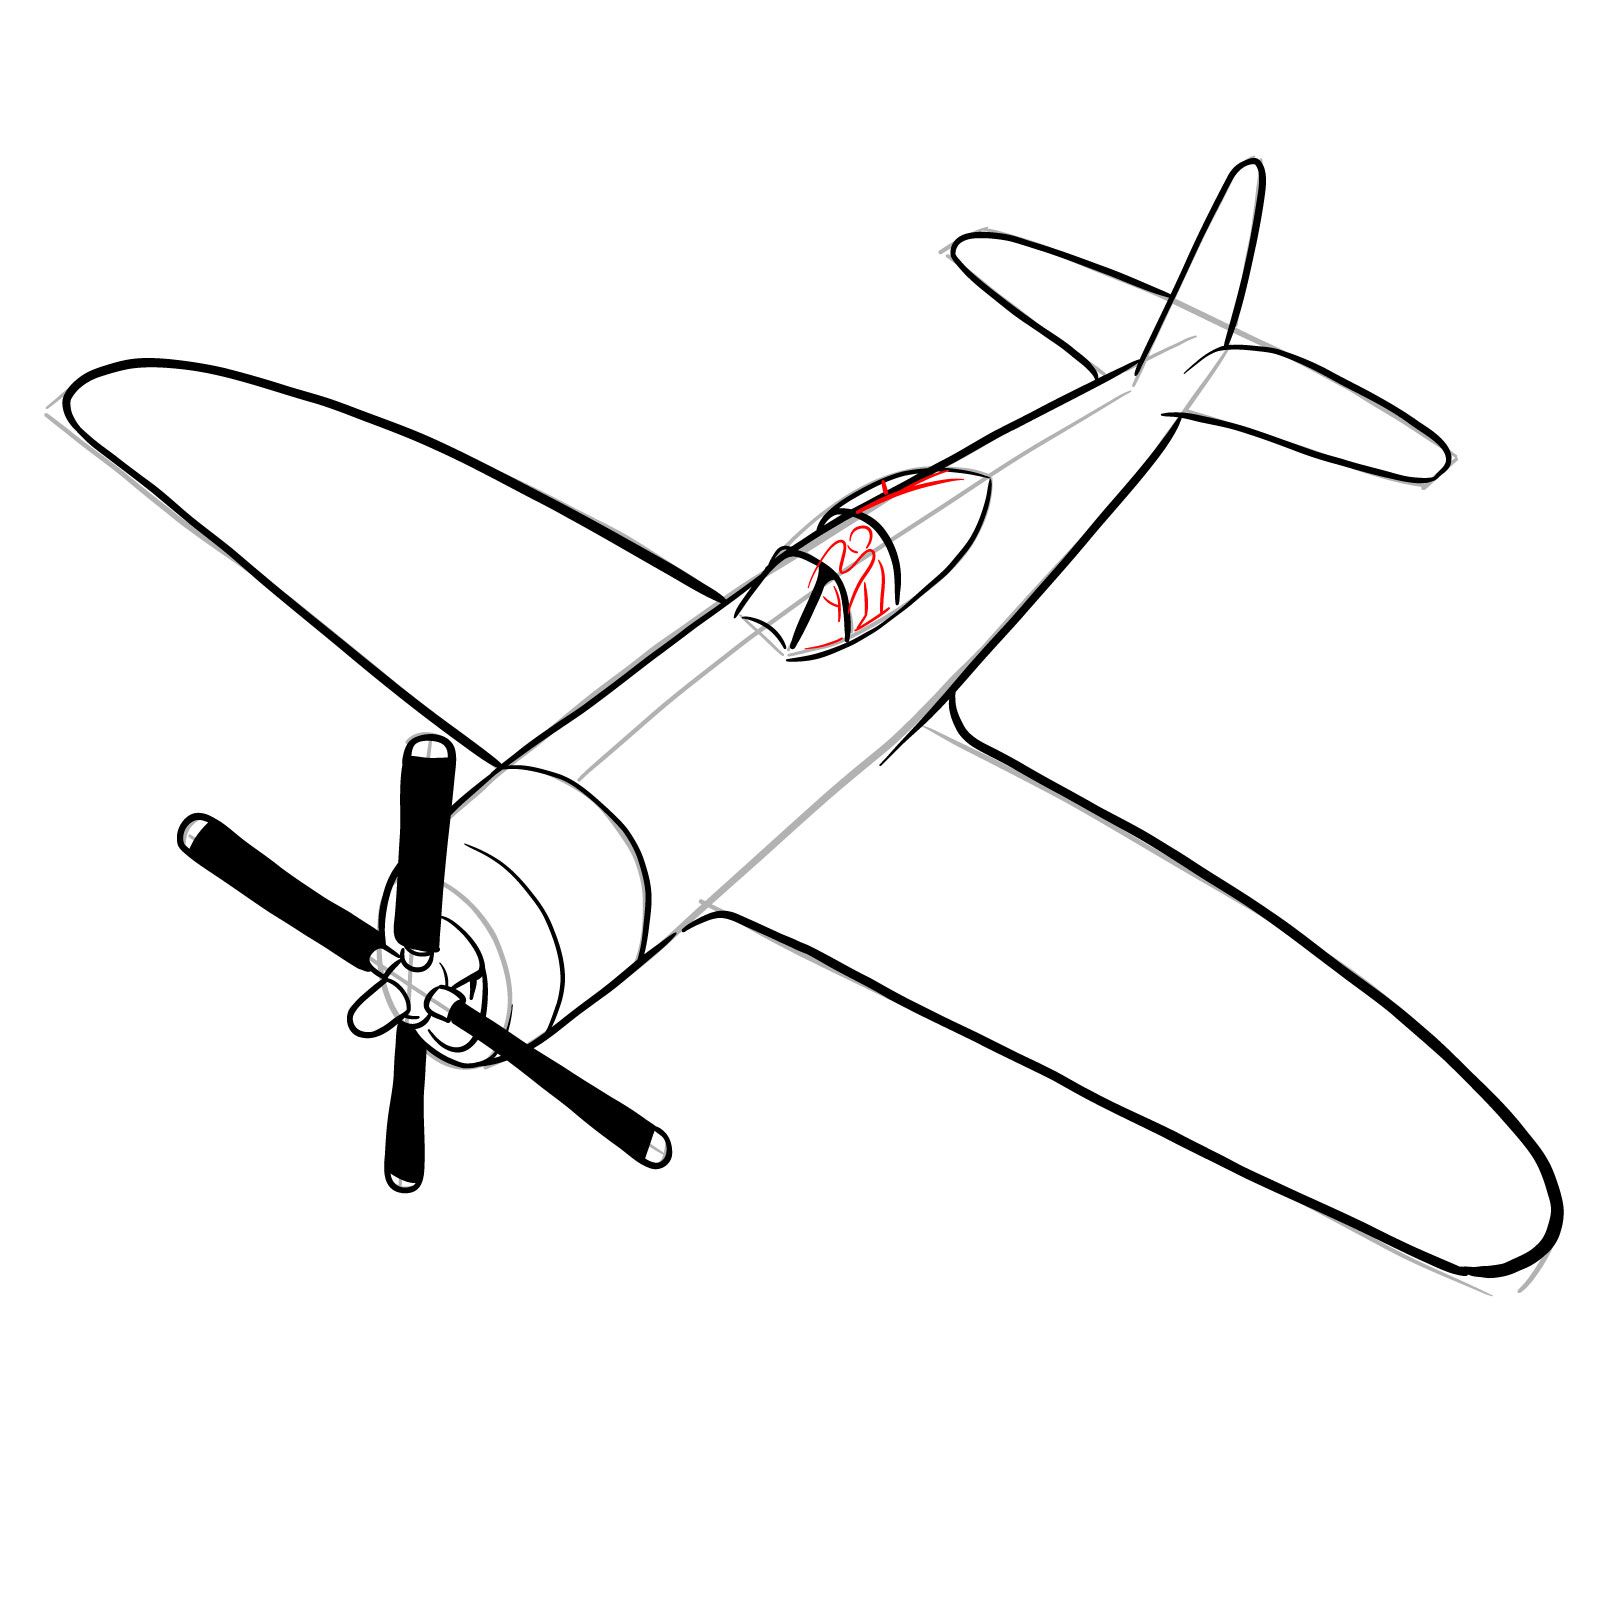 How to draw the Republic P-47 Thunderbolt - step 21